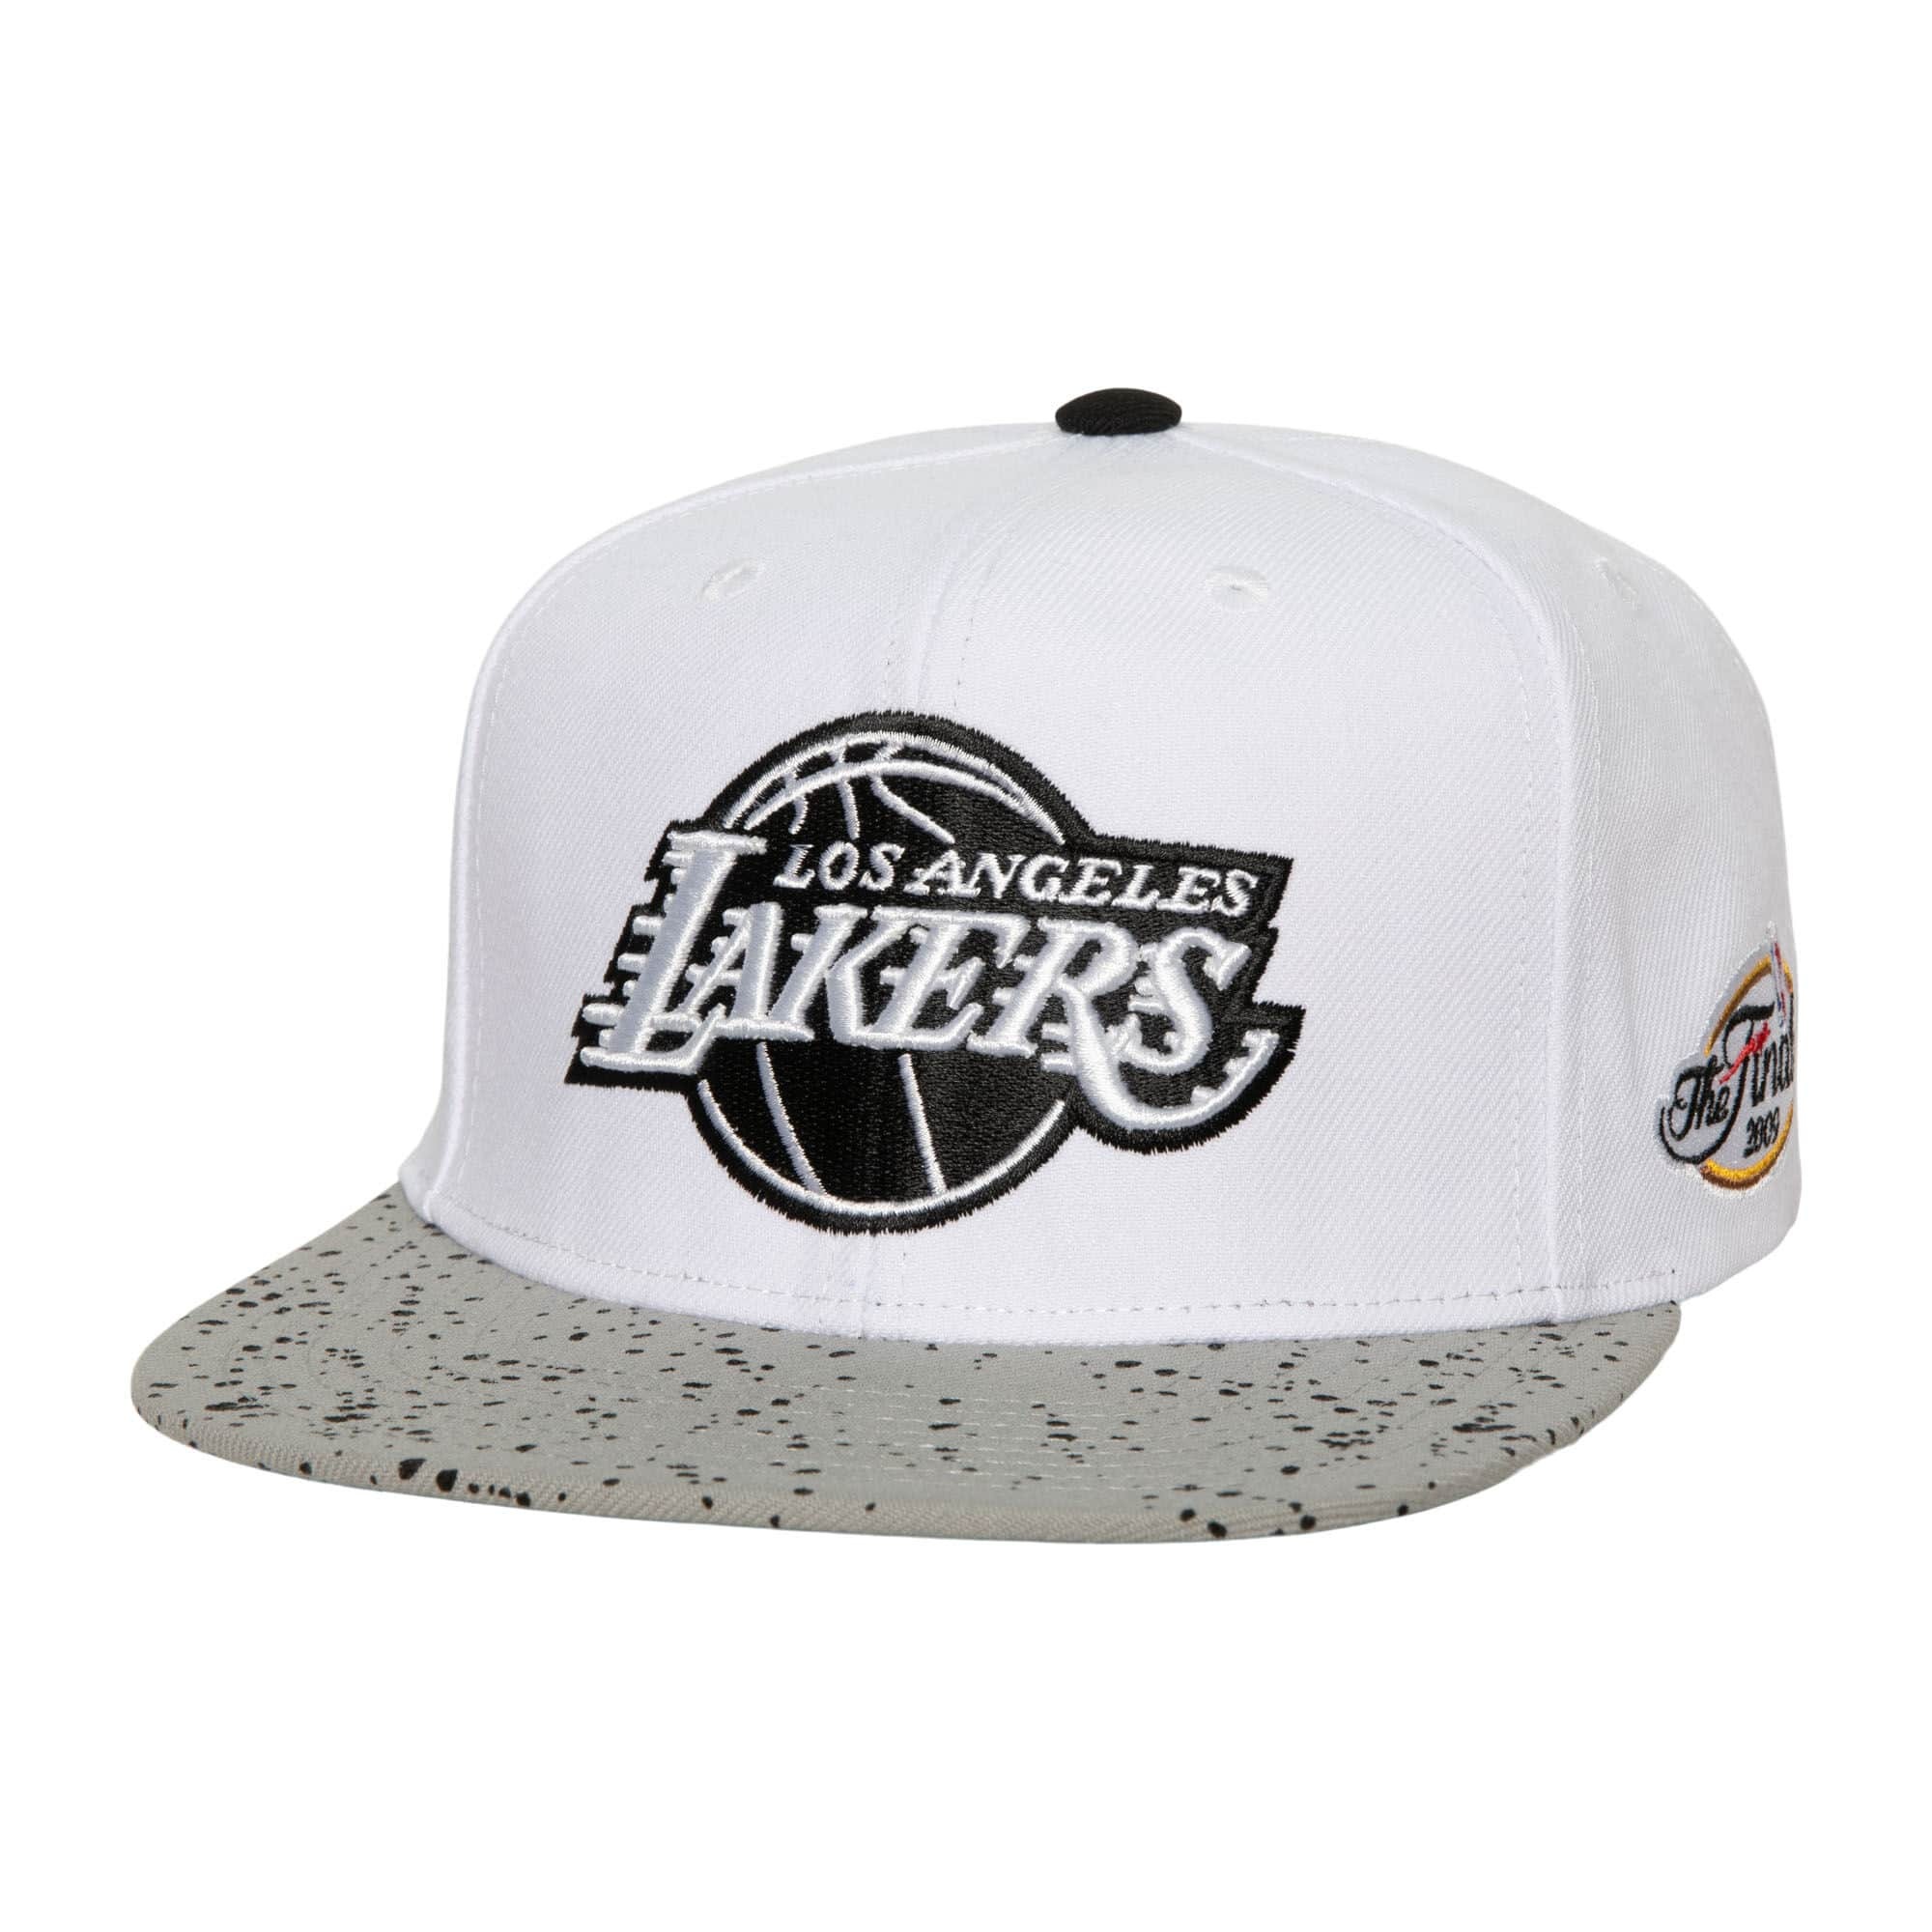 casquette los angeles lakers nba cement top